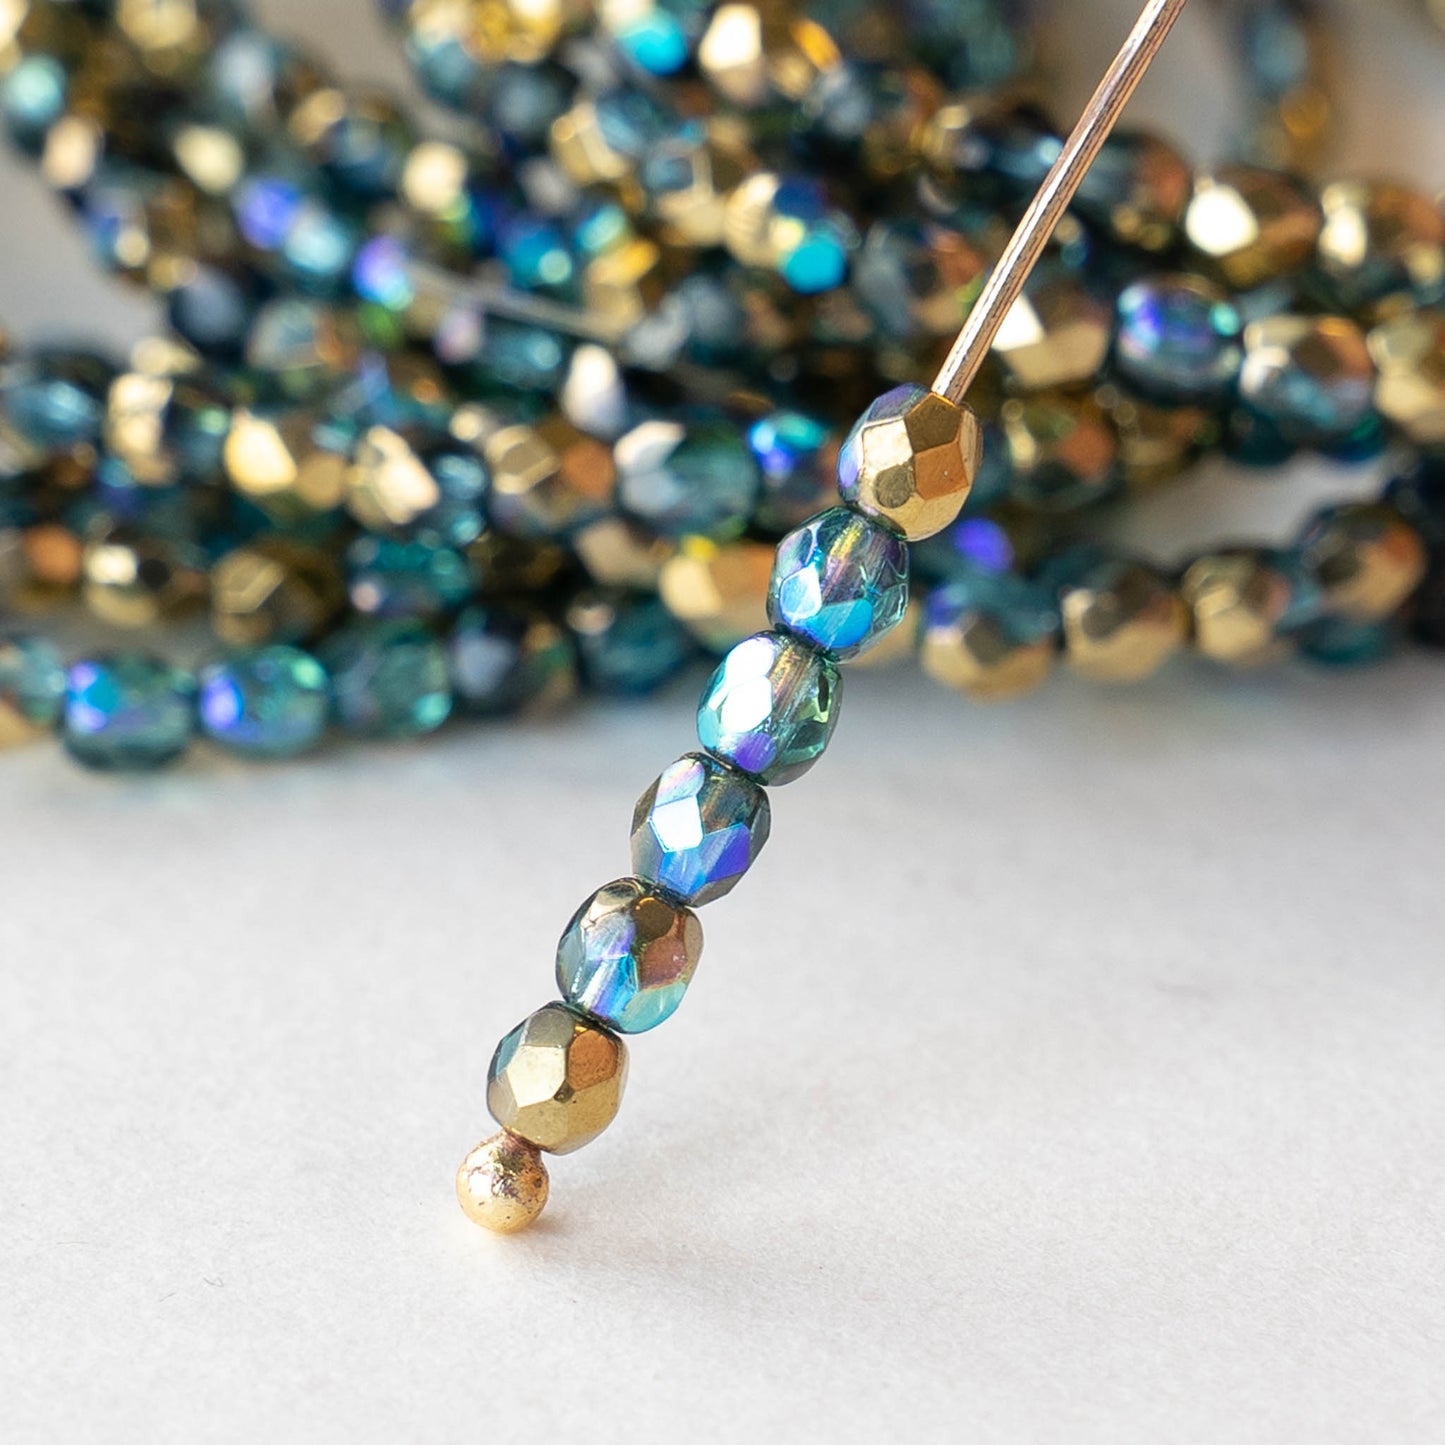 3mm Round Firepolished Beads - Blue Green with Gold Luster AB - 50 Beads